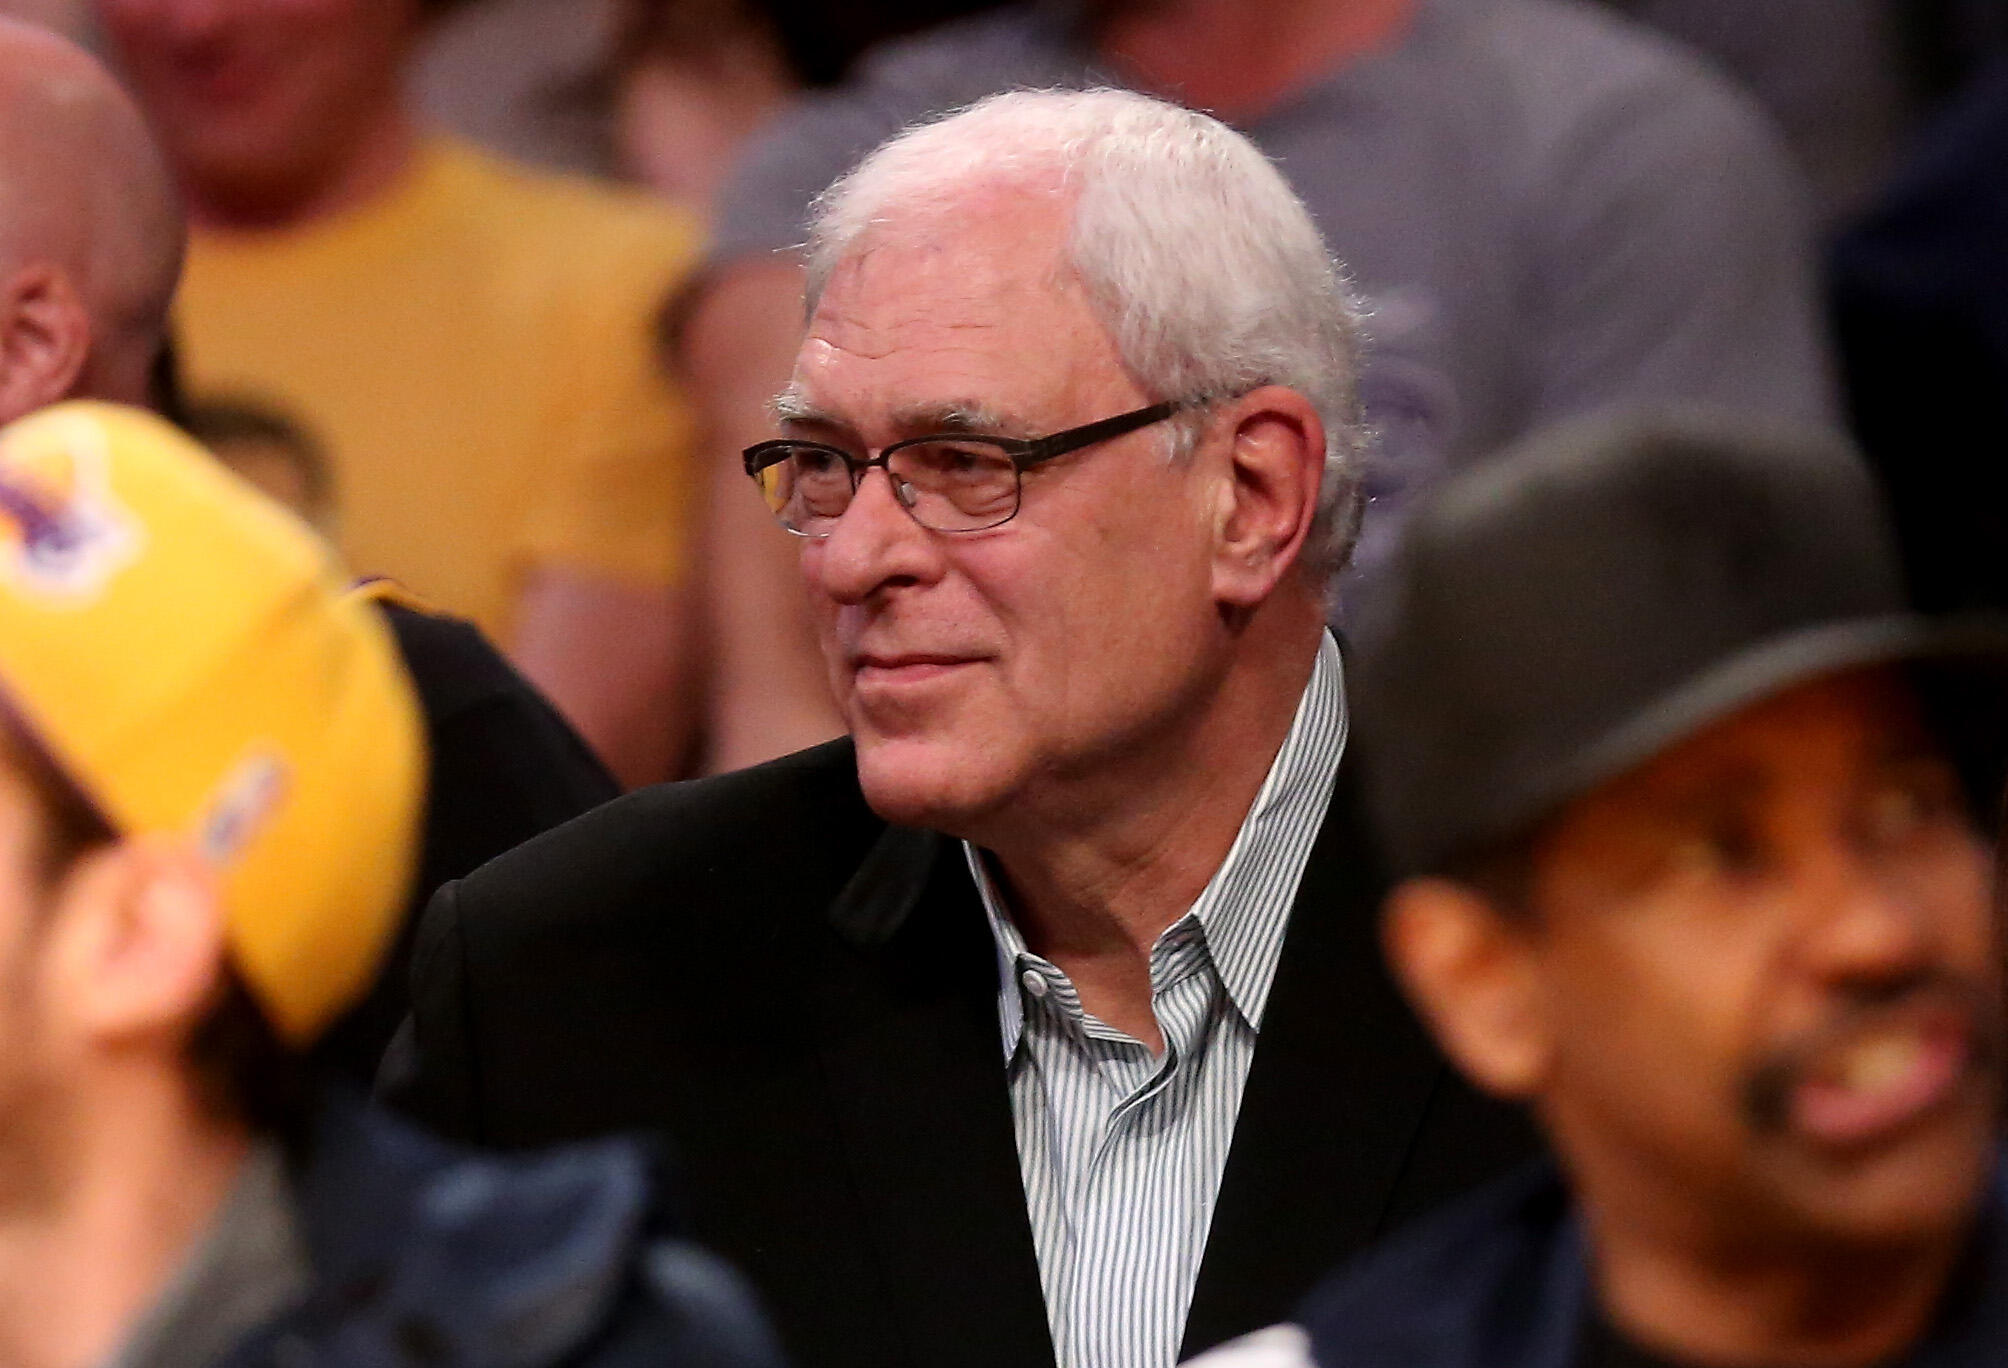 LOS ANGELES, CA - MARCH 12:   New York Knicks president Phil Jackson watches from the stands as his team plays the Los Angeles Lakers at Staples Center on March 12, 2015 in Los Angeles, California.   The Knicks won 101-94.  NOTE TO USER: User expressly ac